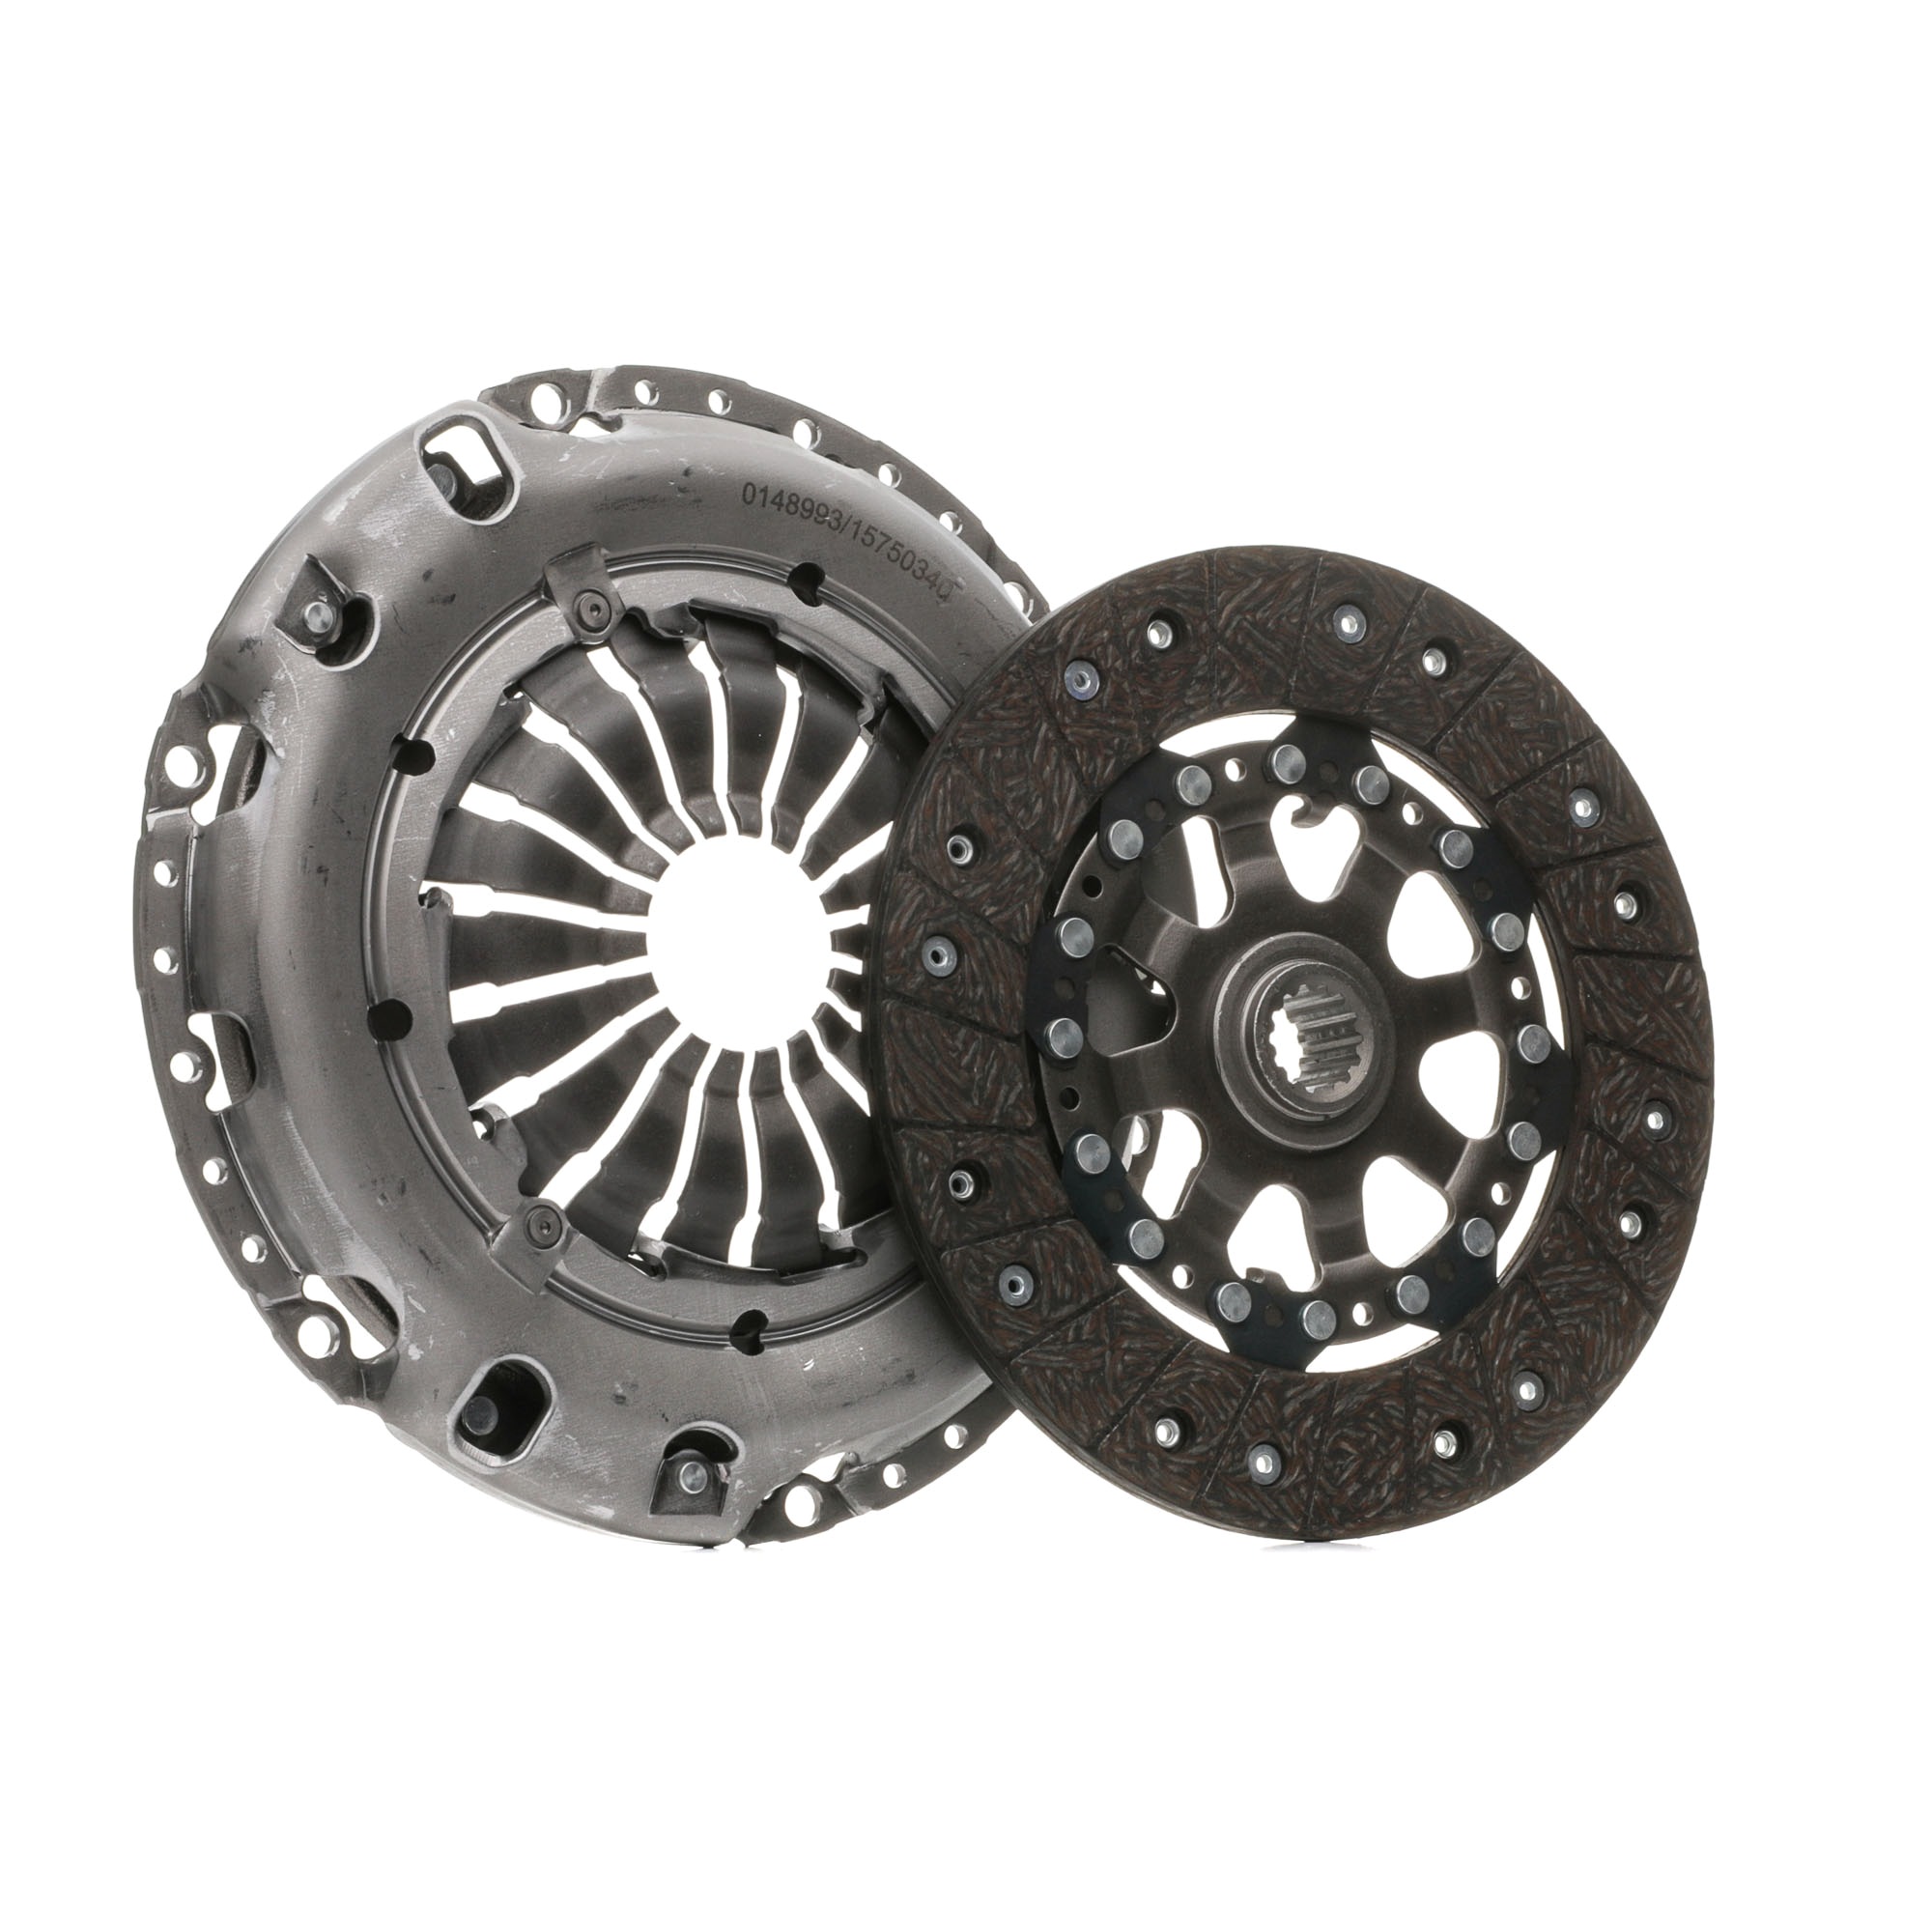 SKCK-0100922 STARK Clutch set OPEL with clutch pressure plate, without central slave cylinder, with clutch disc, 228mm